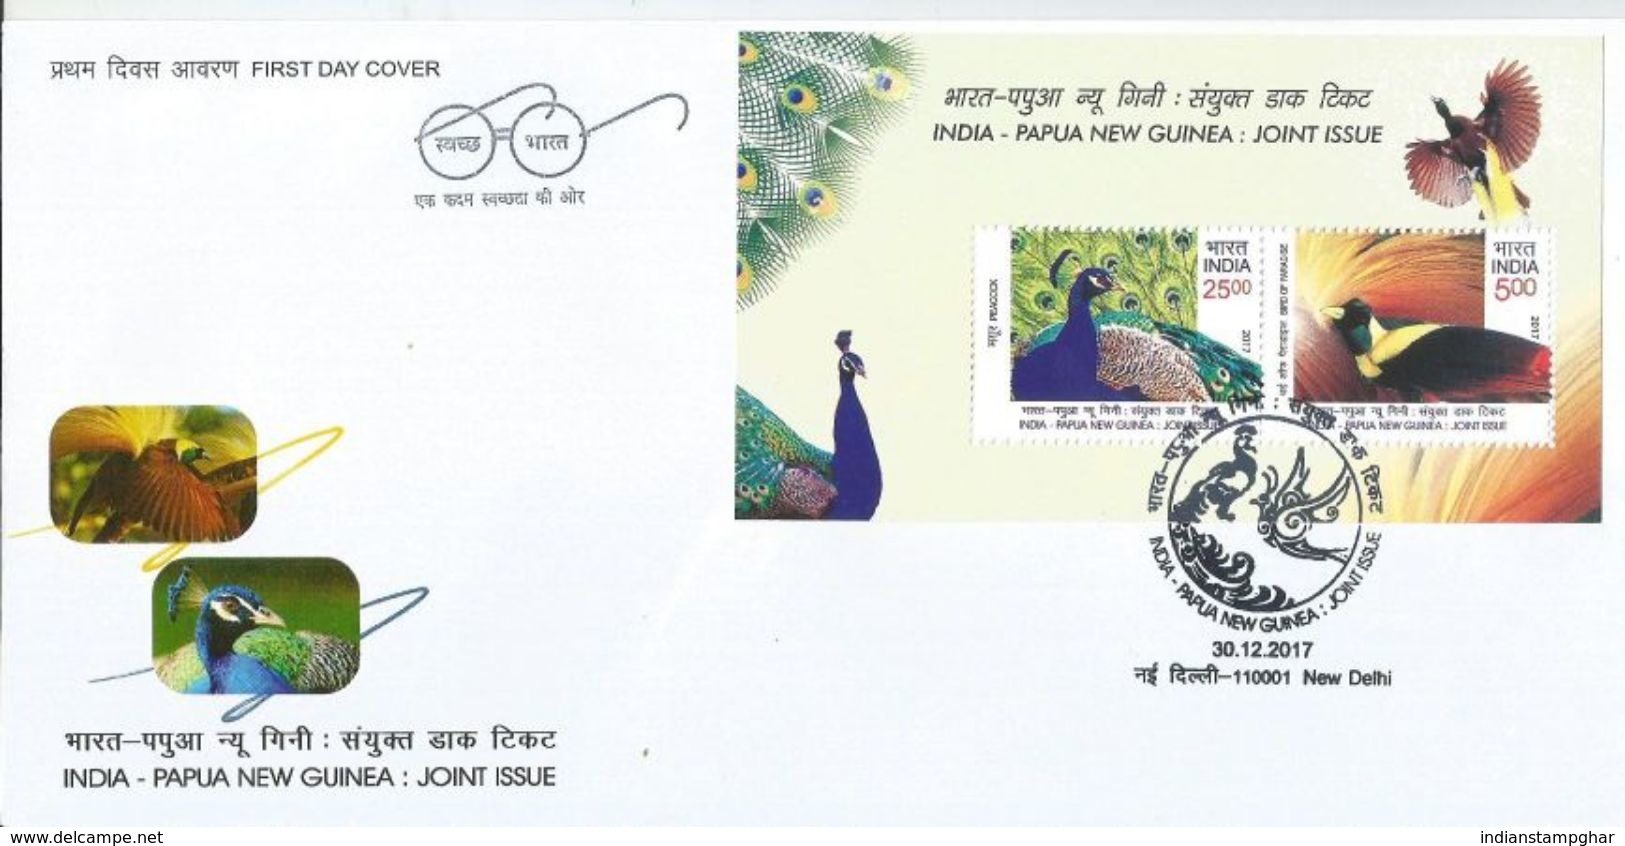 Inde, India,  2017  Indien FDC With Miniature Sheet First Day Cancelled, Peacock, Bird Of Paradise, As Per Scan - Paons